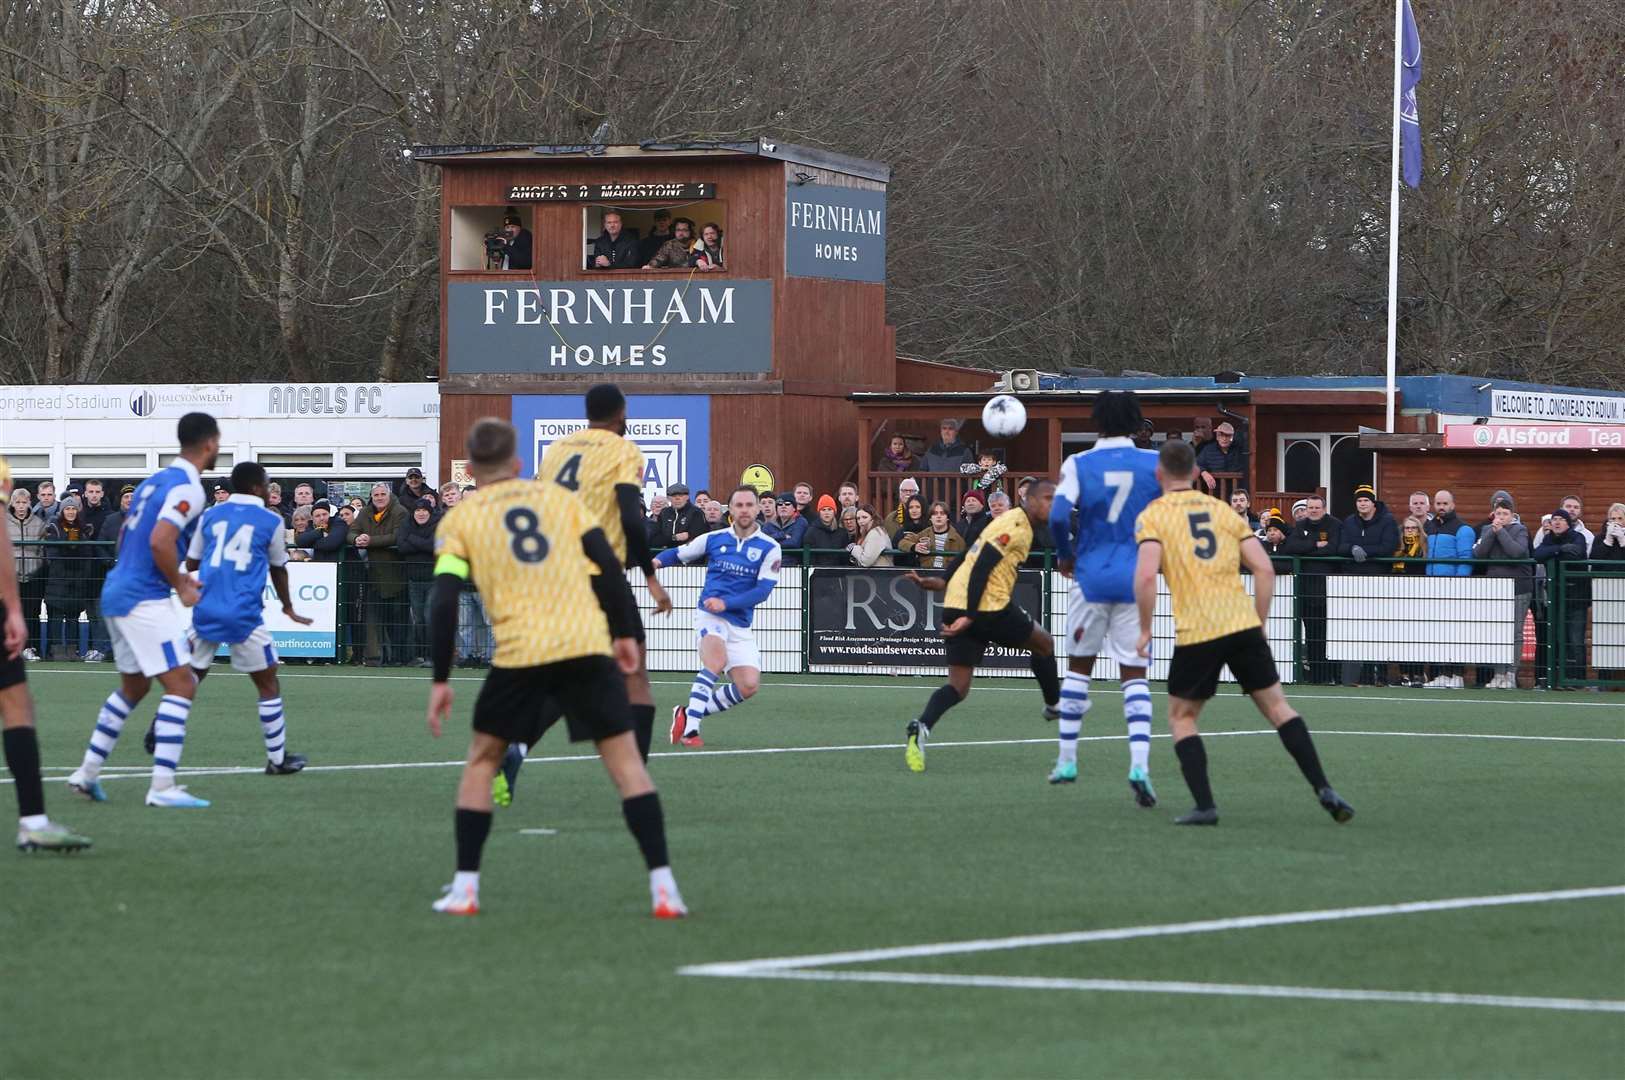 Jordan Higgs’ brilliant volley against Maidstone was voted goal of the season. Picture: David Couldridge